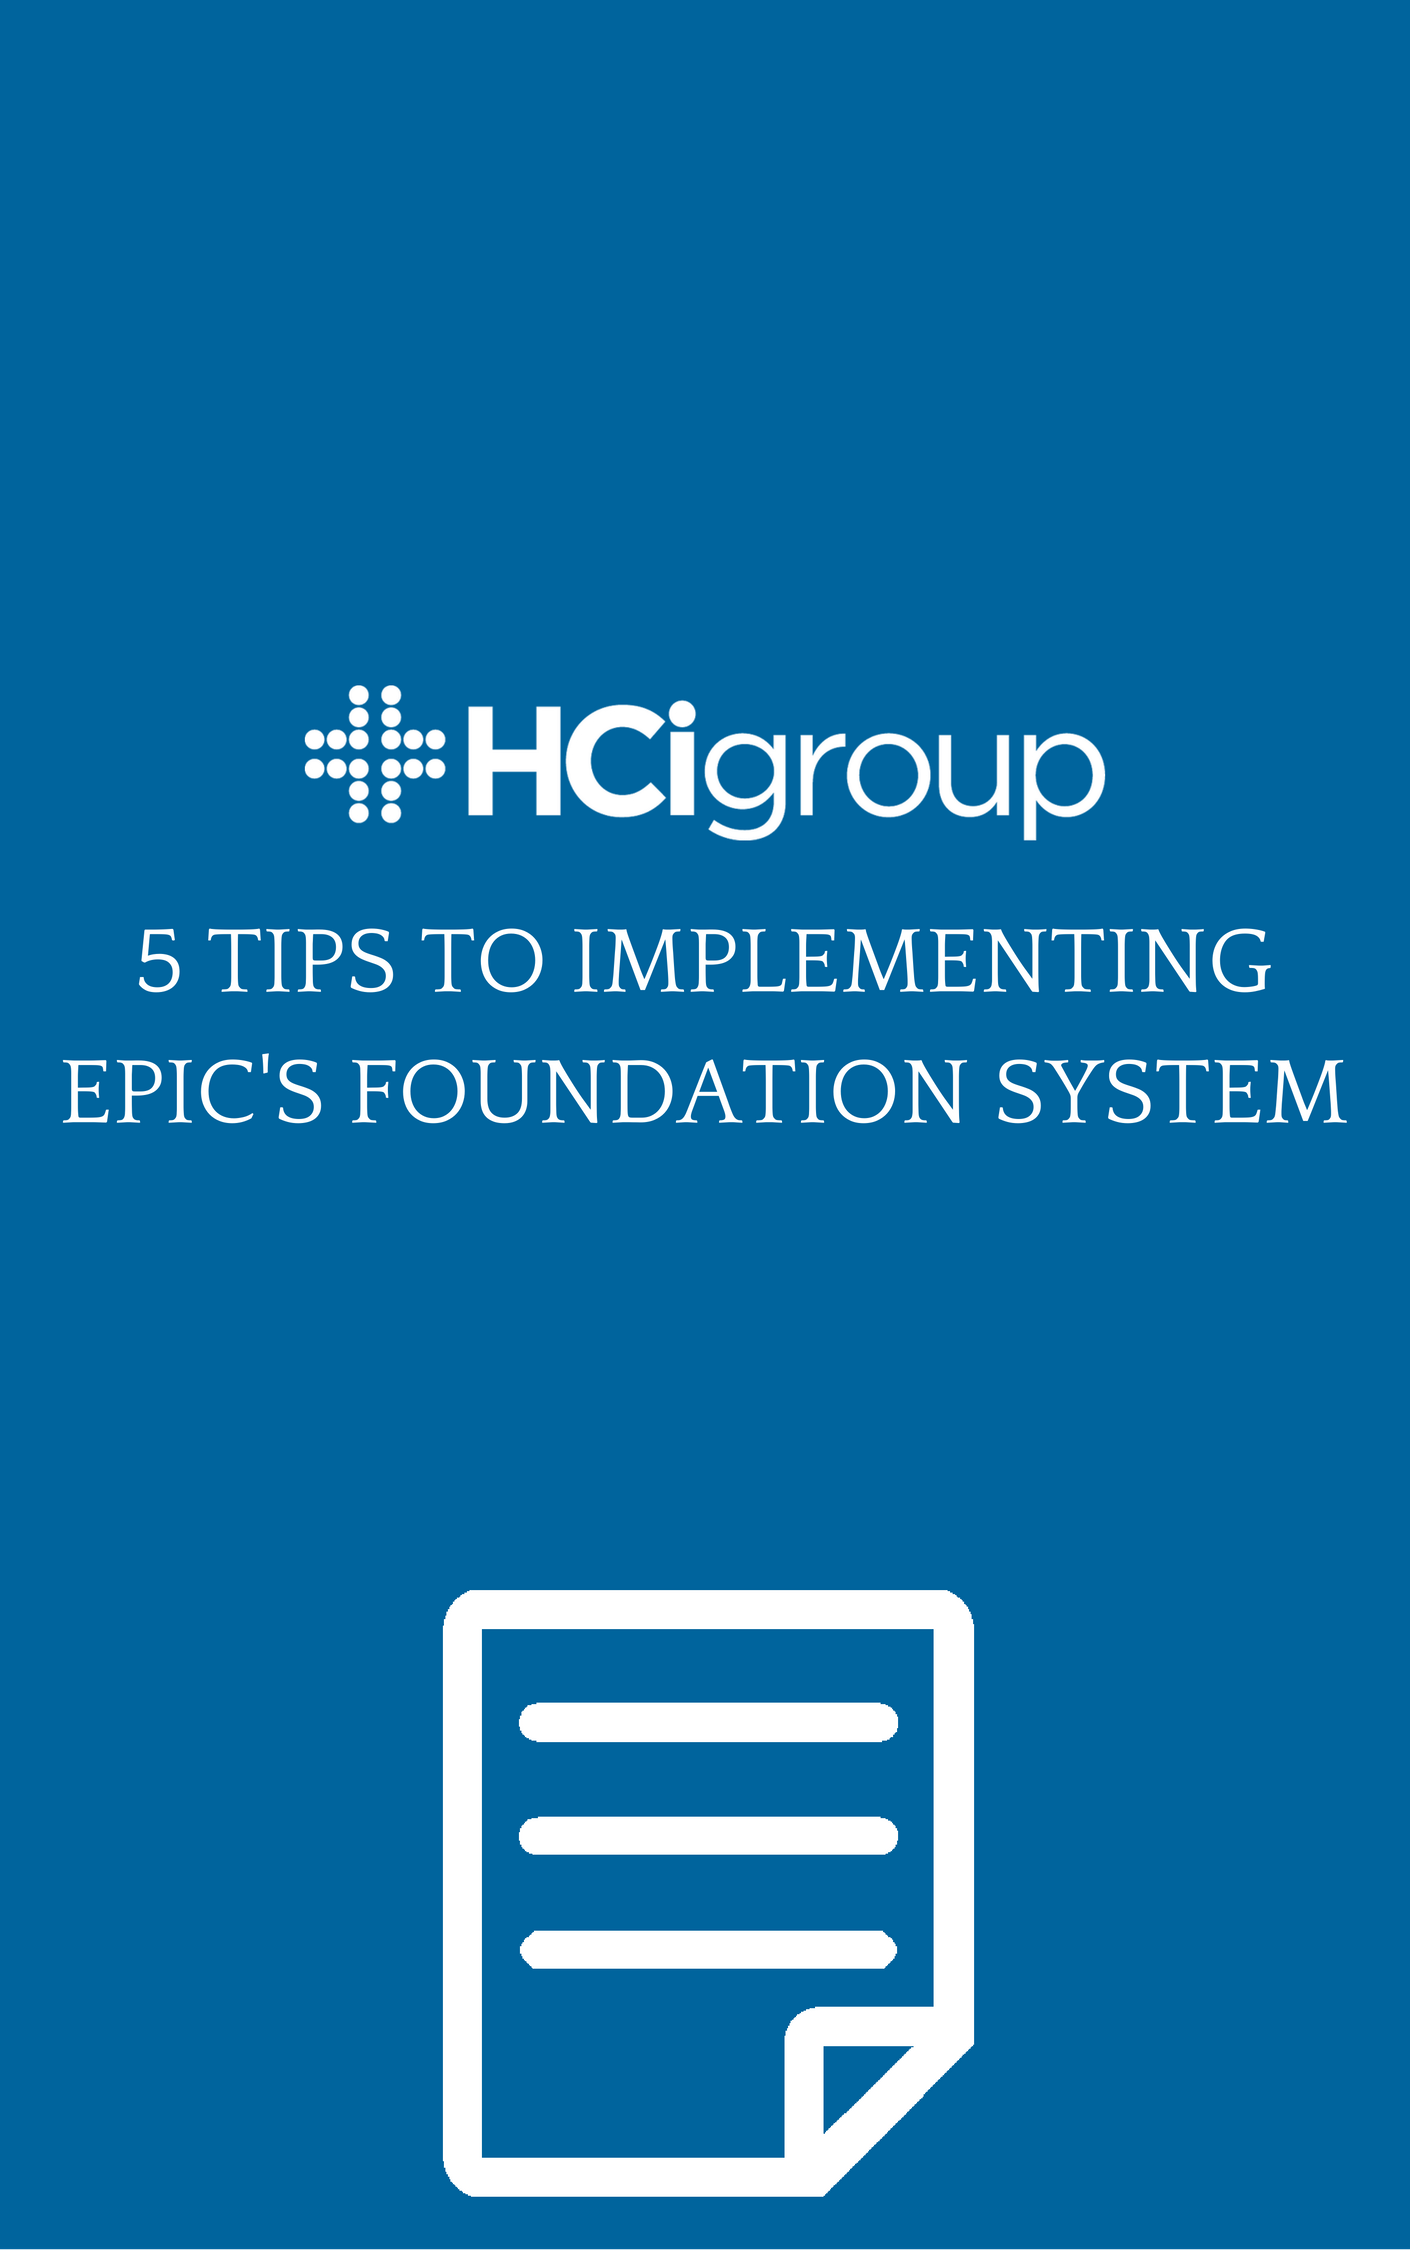 5 Tips to Implementing Epic’s Foundation System